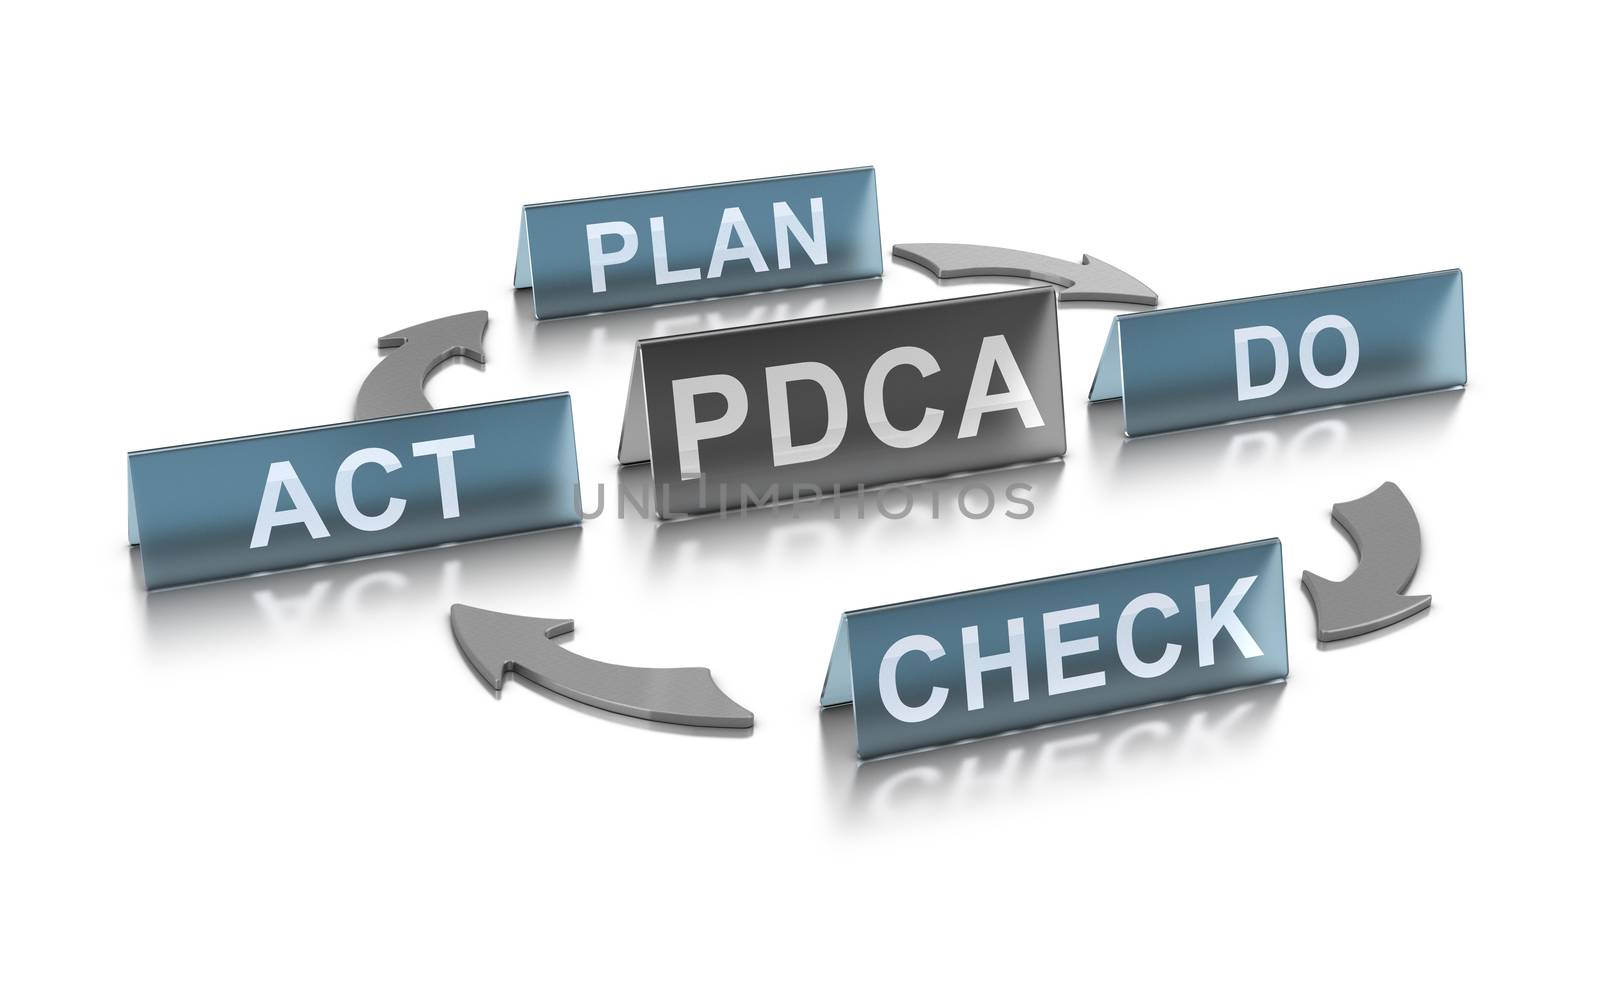 3D illustration of PDCA management method (plan, Do, check and Act) over white background. Concept for continuous improvement in lean manufacturing.